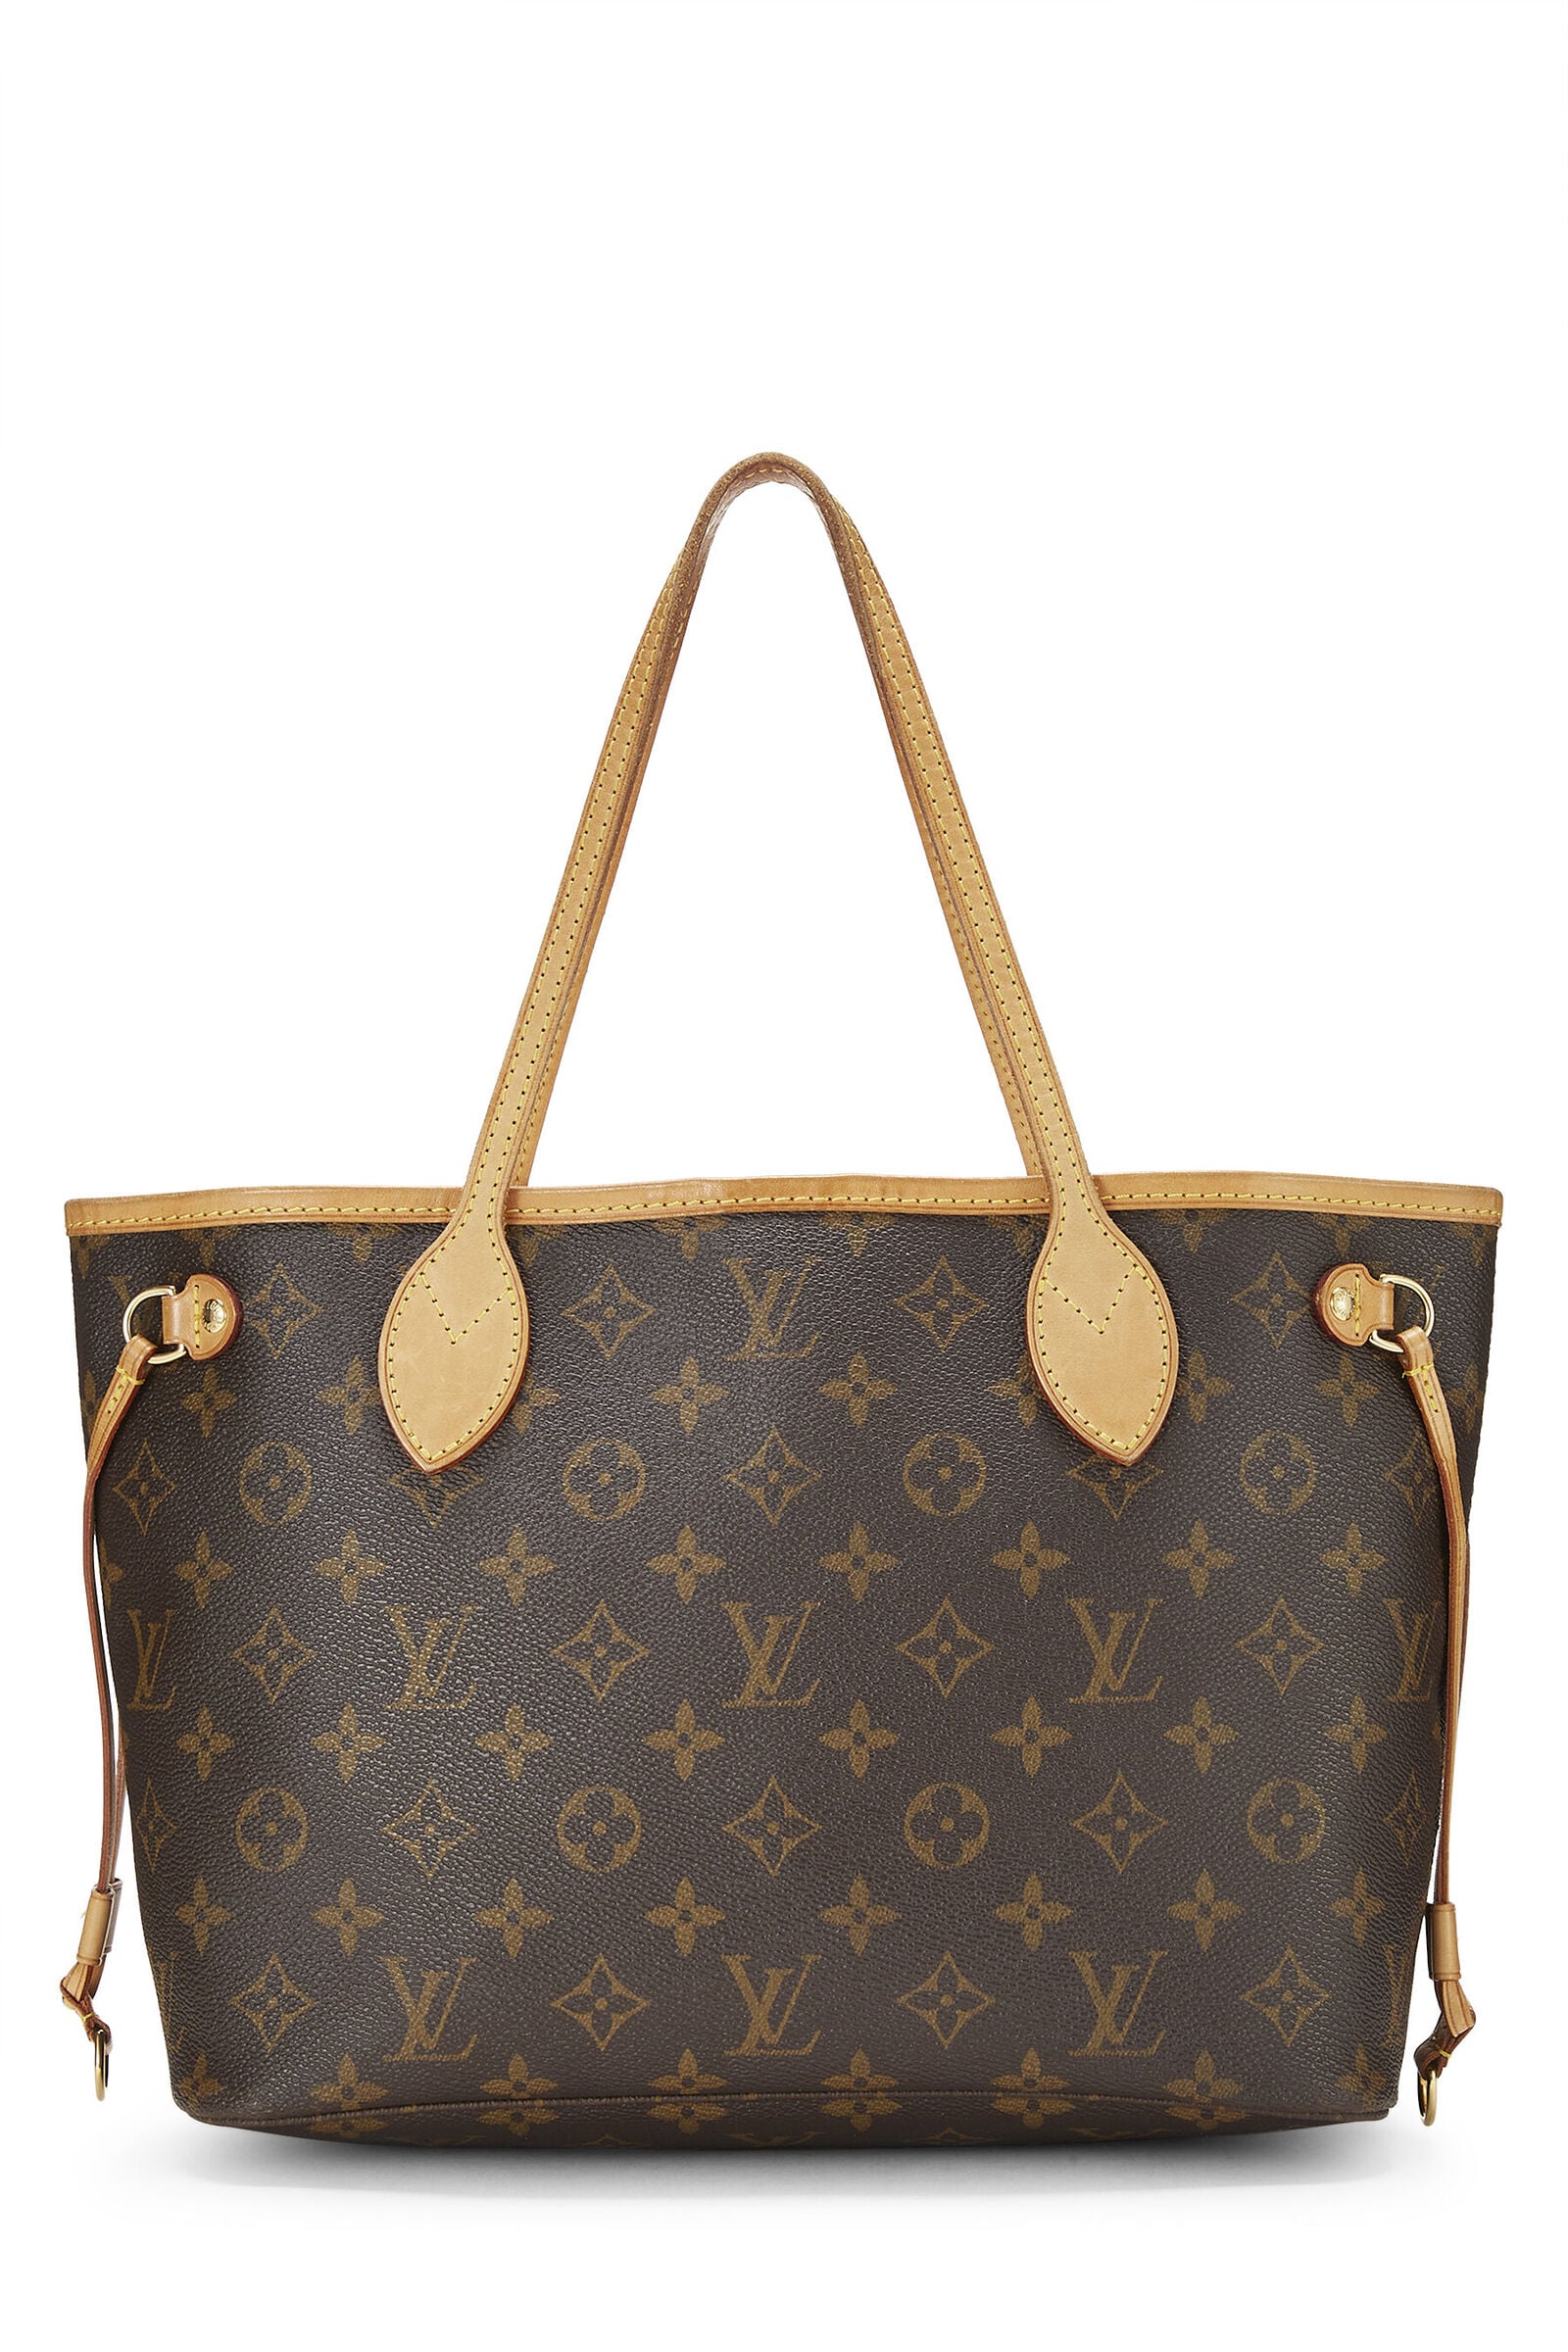 A Design Hit: The Louis Vuitton Neverfull, Handbags and Accessories